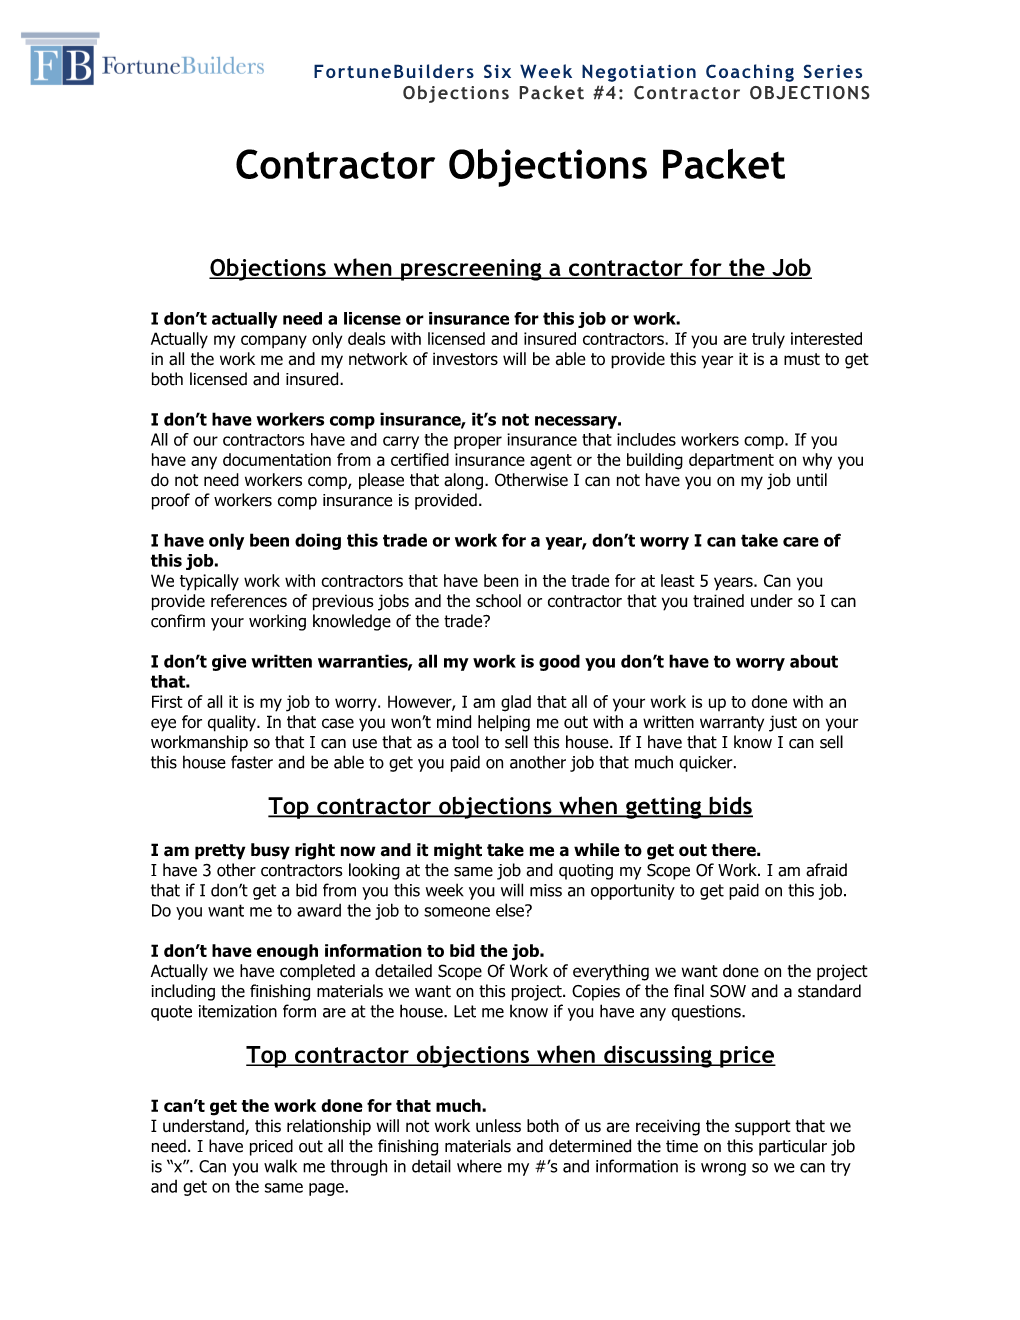 Contractor Objections Packet